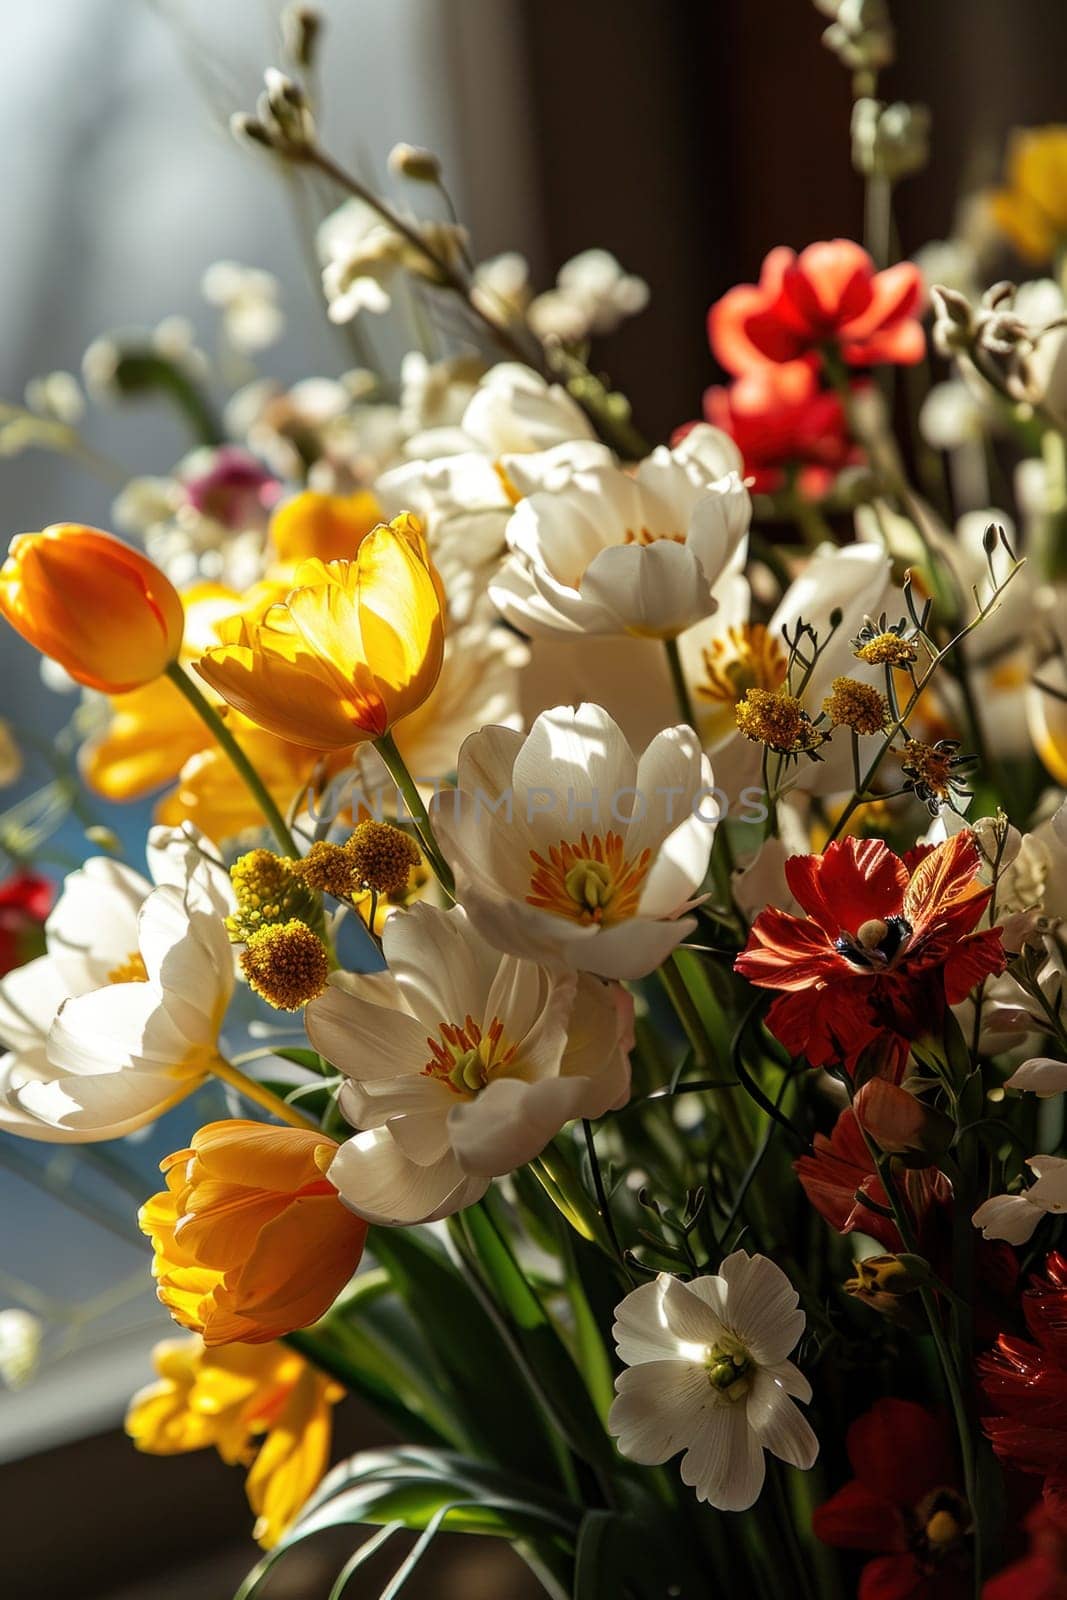 A close up of a bouquet with many different flowers in it